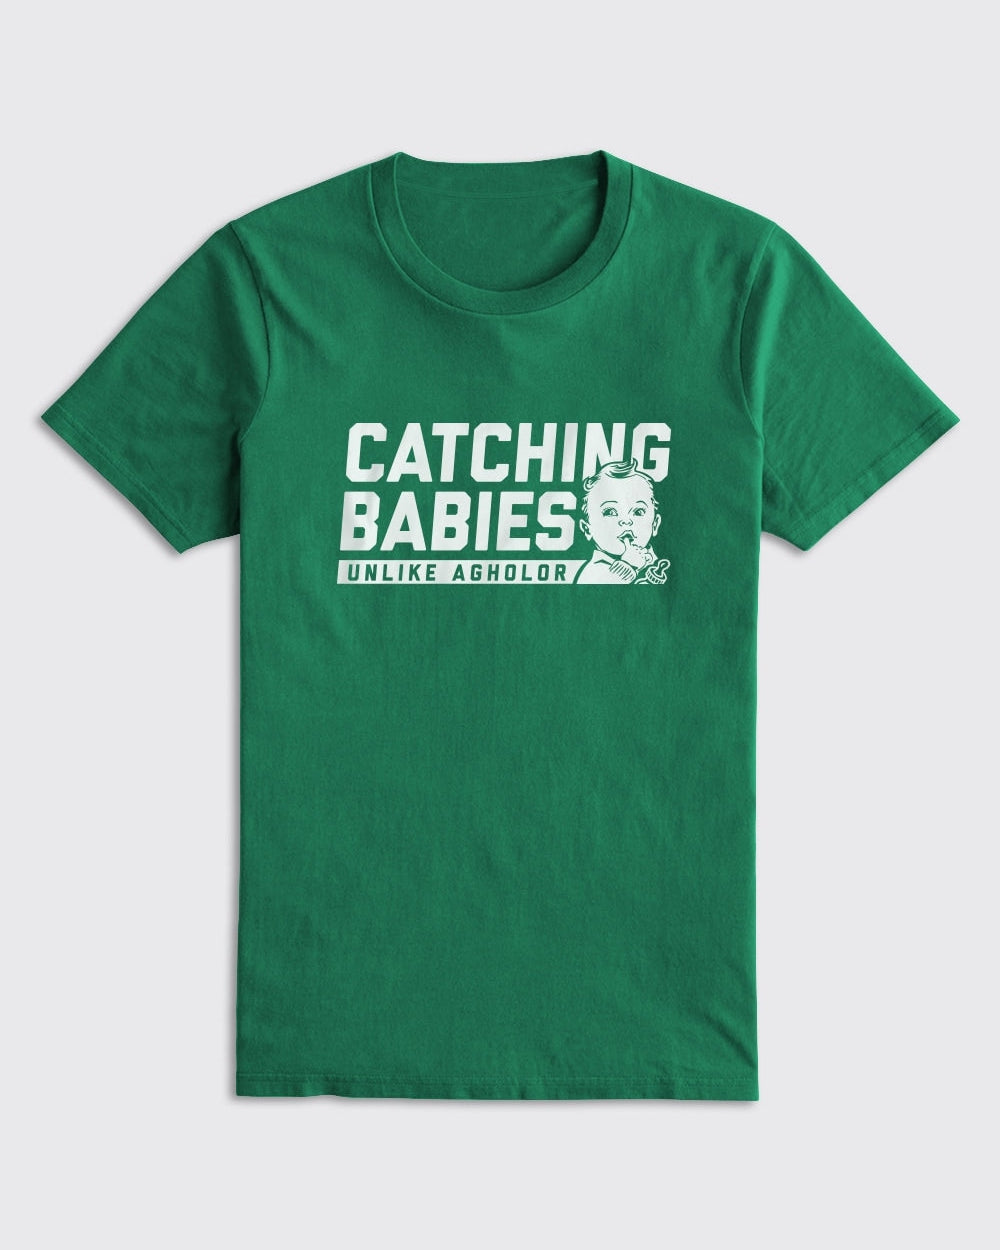 Philadelphia Eagles-Catching Babies Unlike Agholor Shirt-Kelly-Philly Sports Shirts